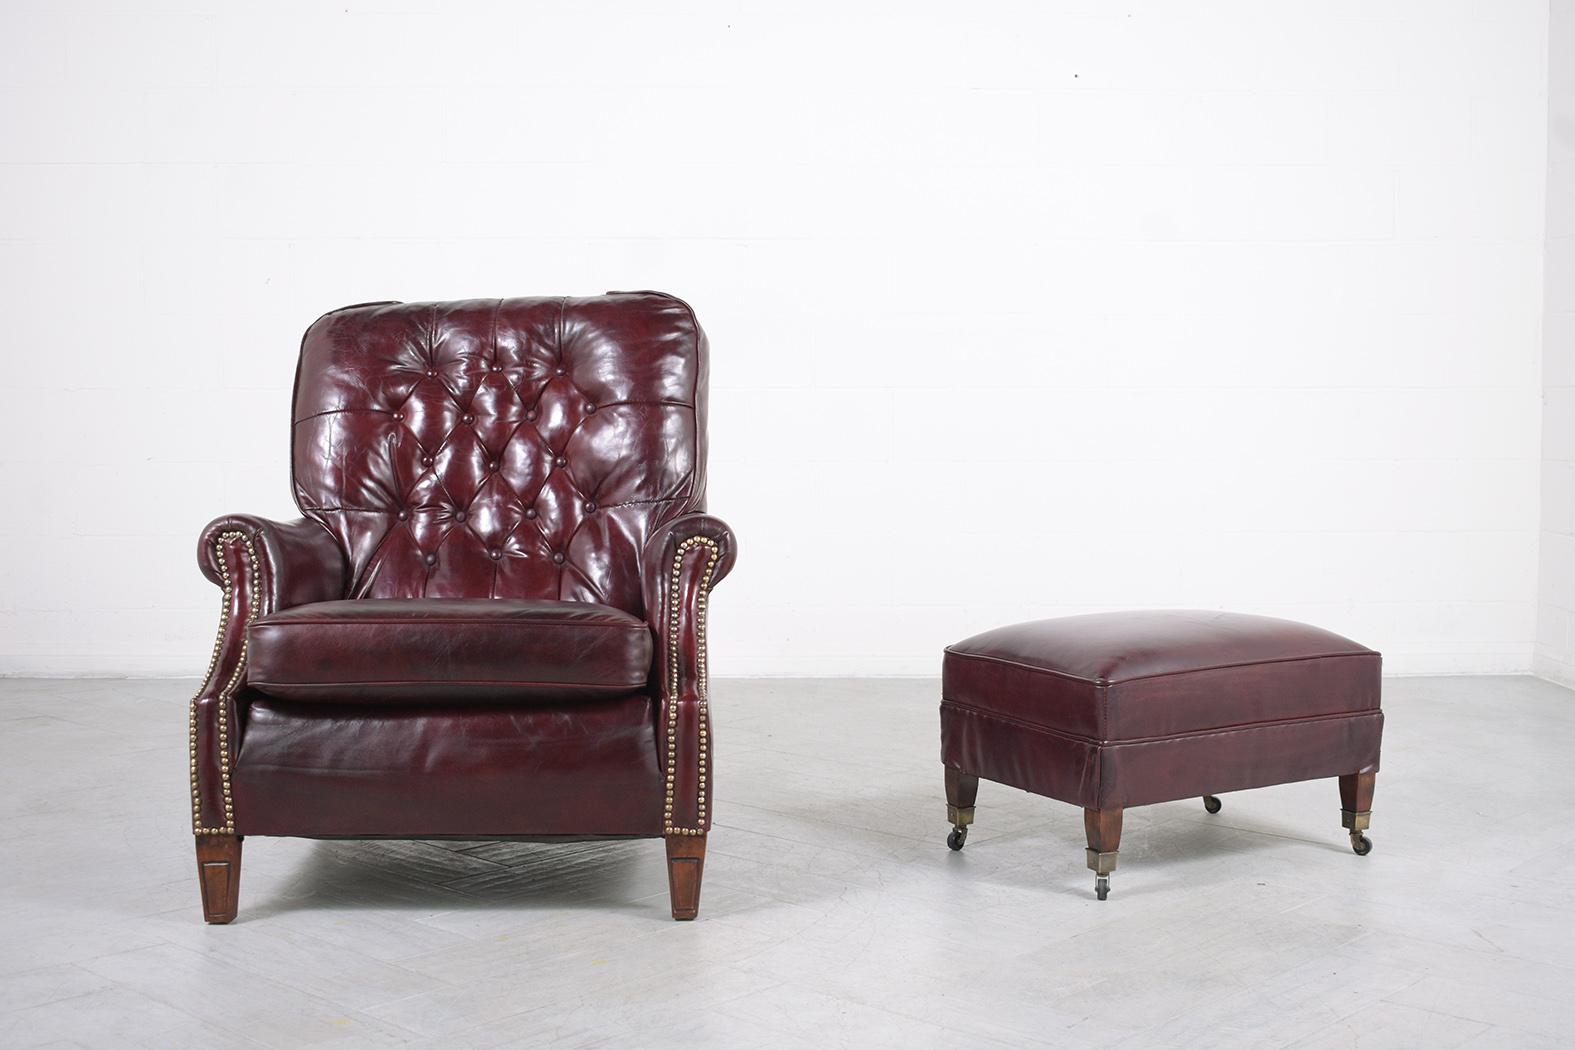 Dive into the opulence of the early 1900s with our Antique English Chesterfield Lounge Chair, masterfully hand-crafted from high-quality leather and meticulously restored by our team of skilled artisans. Radiating timeless elegance, this chair